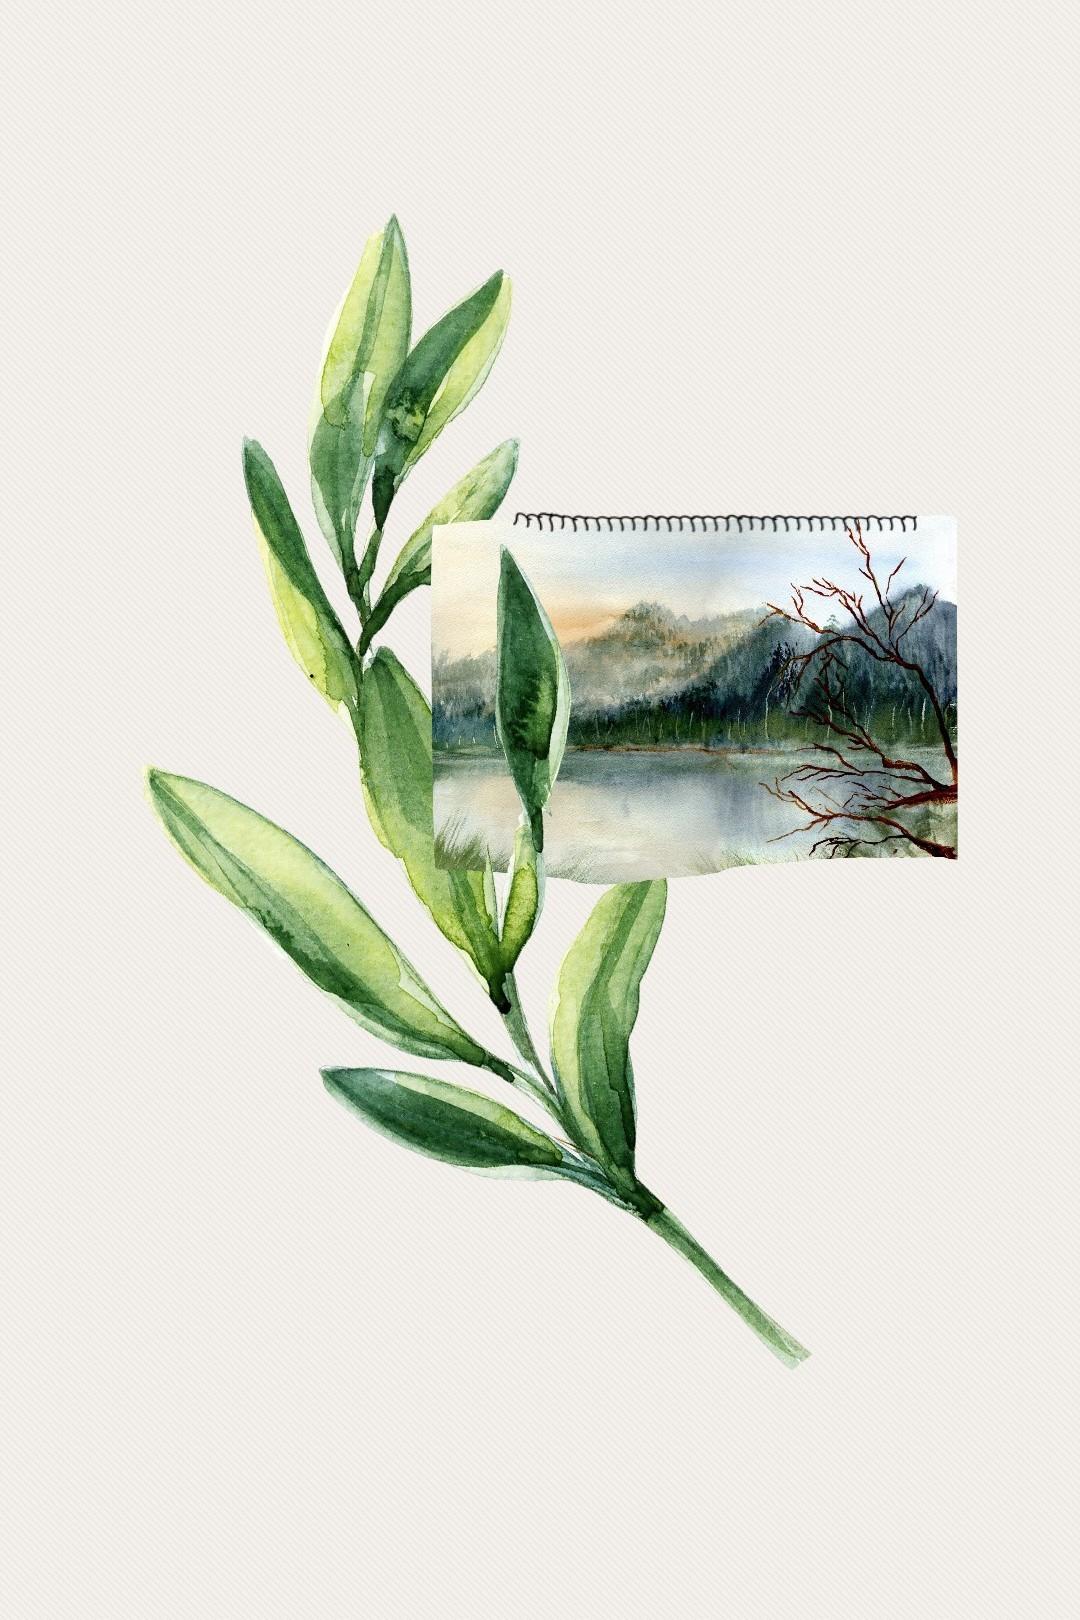 ☝️ ŤĀP ☝️
💆‍♂️ HILOMILO 💆‍♂️
i doubt that you can find one watercolour leaf png that i havent used 😂 i litterally had to hunt thru the image search for this one 😂.
rate /10? 💫